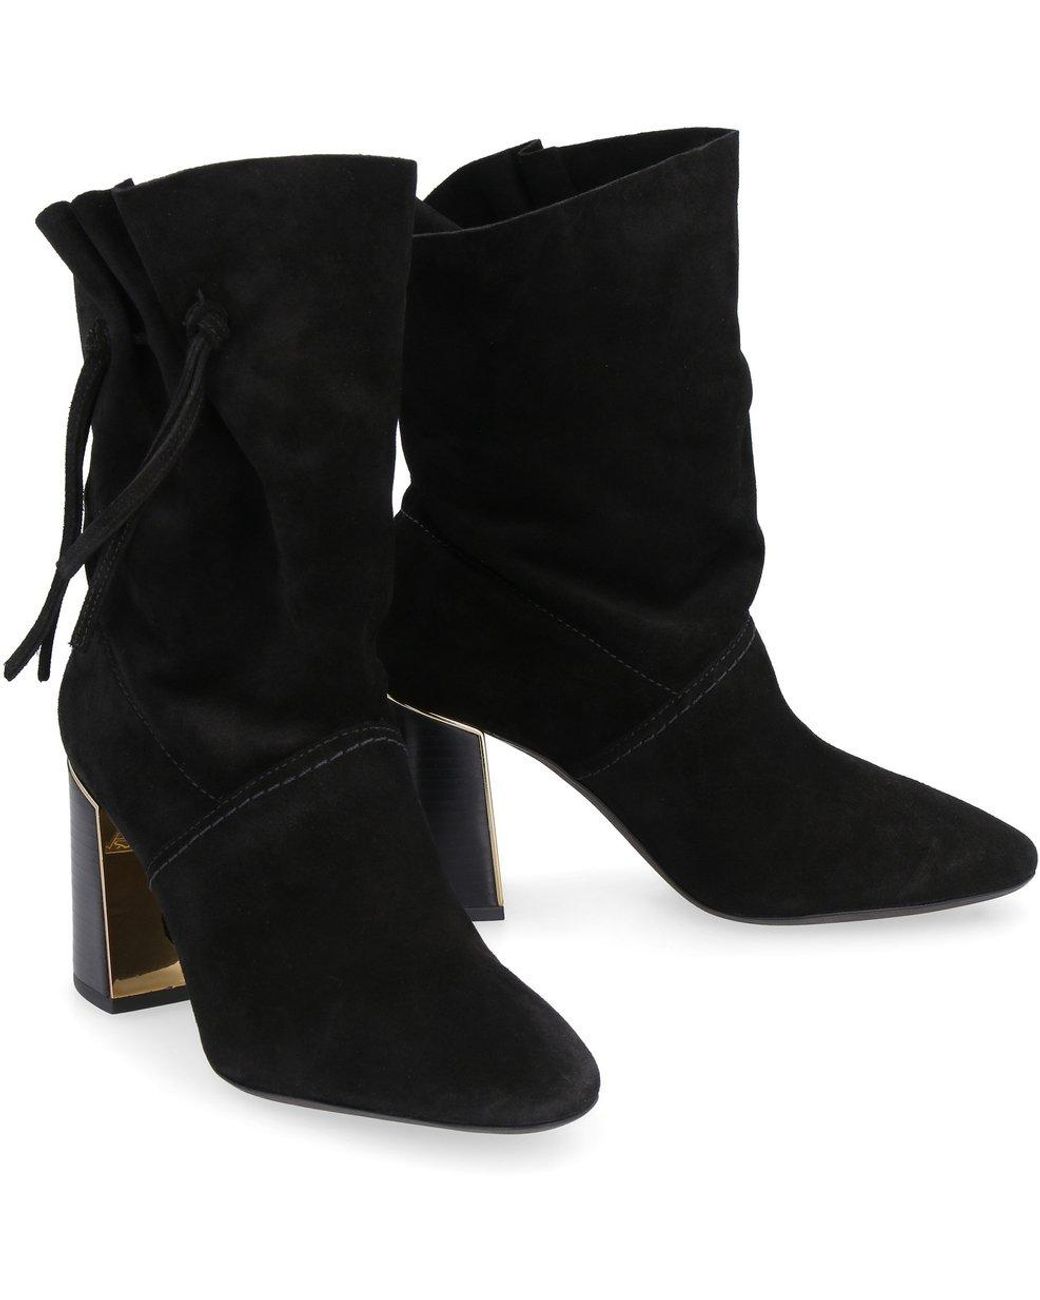 Tory Burch Gigi Ankle Boots in Black | Lyst